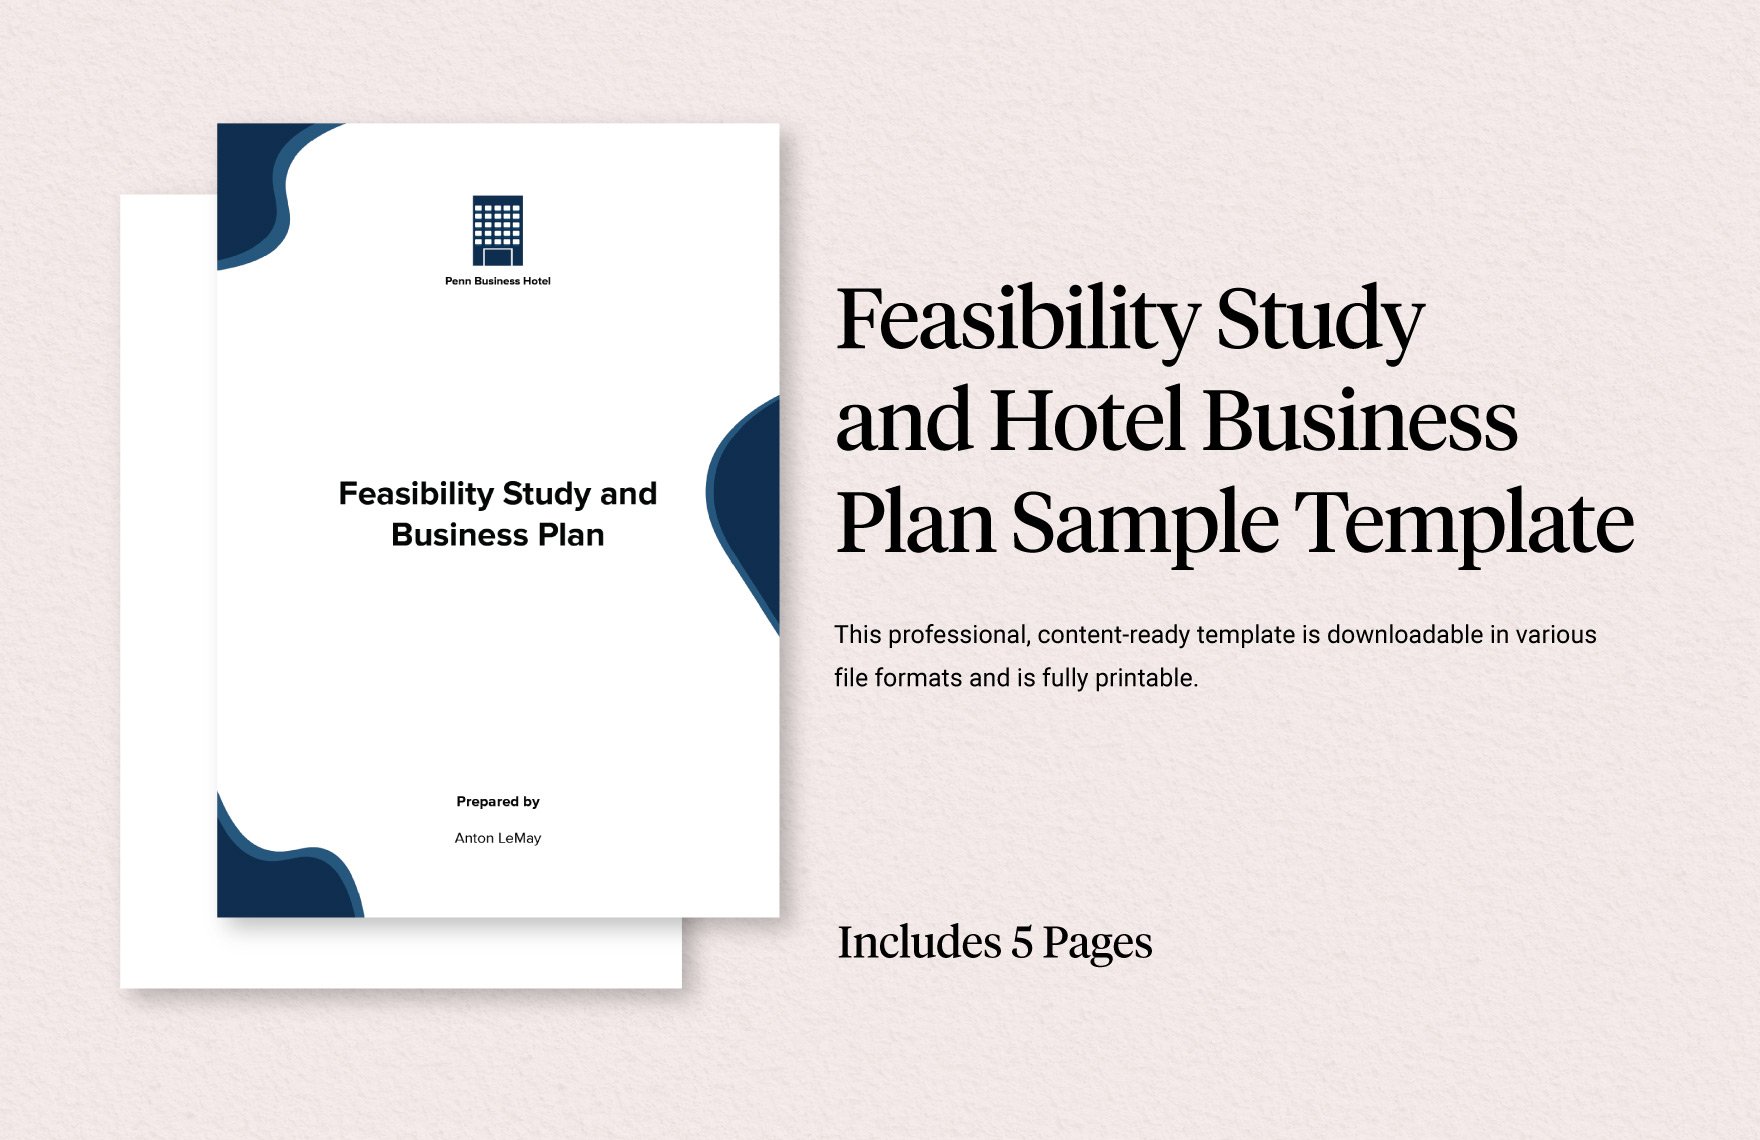 Feasibility Study and Hotel Business Plan Sample Template